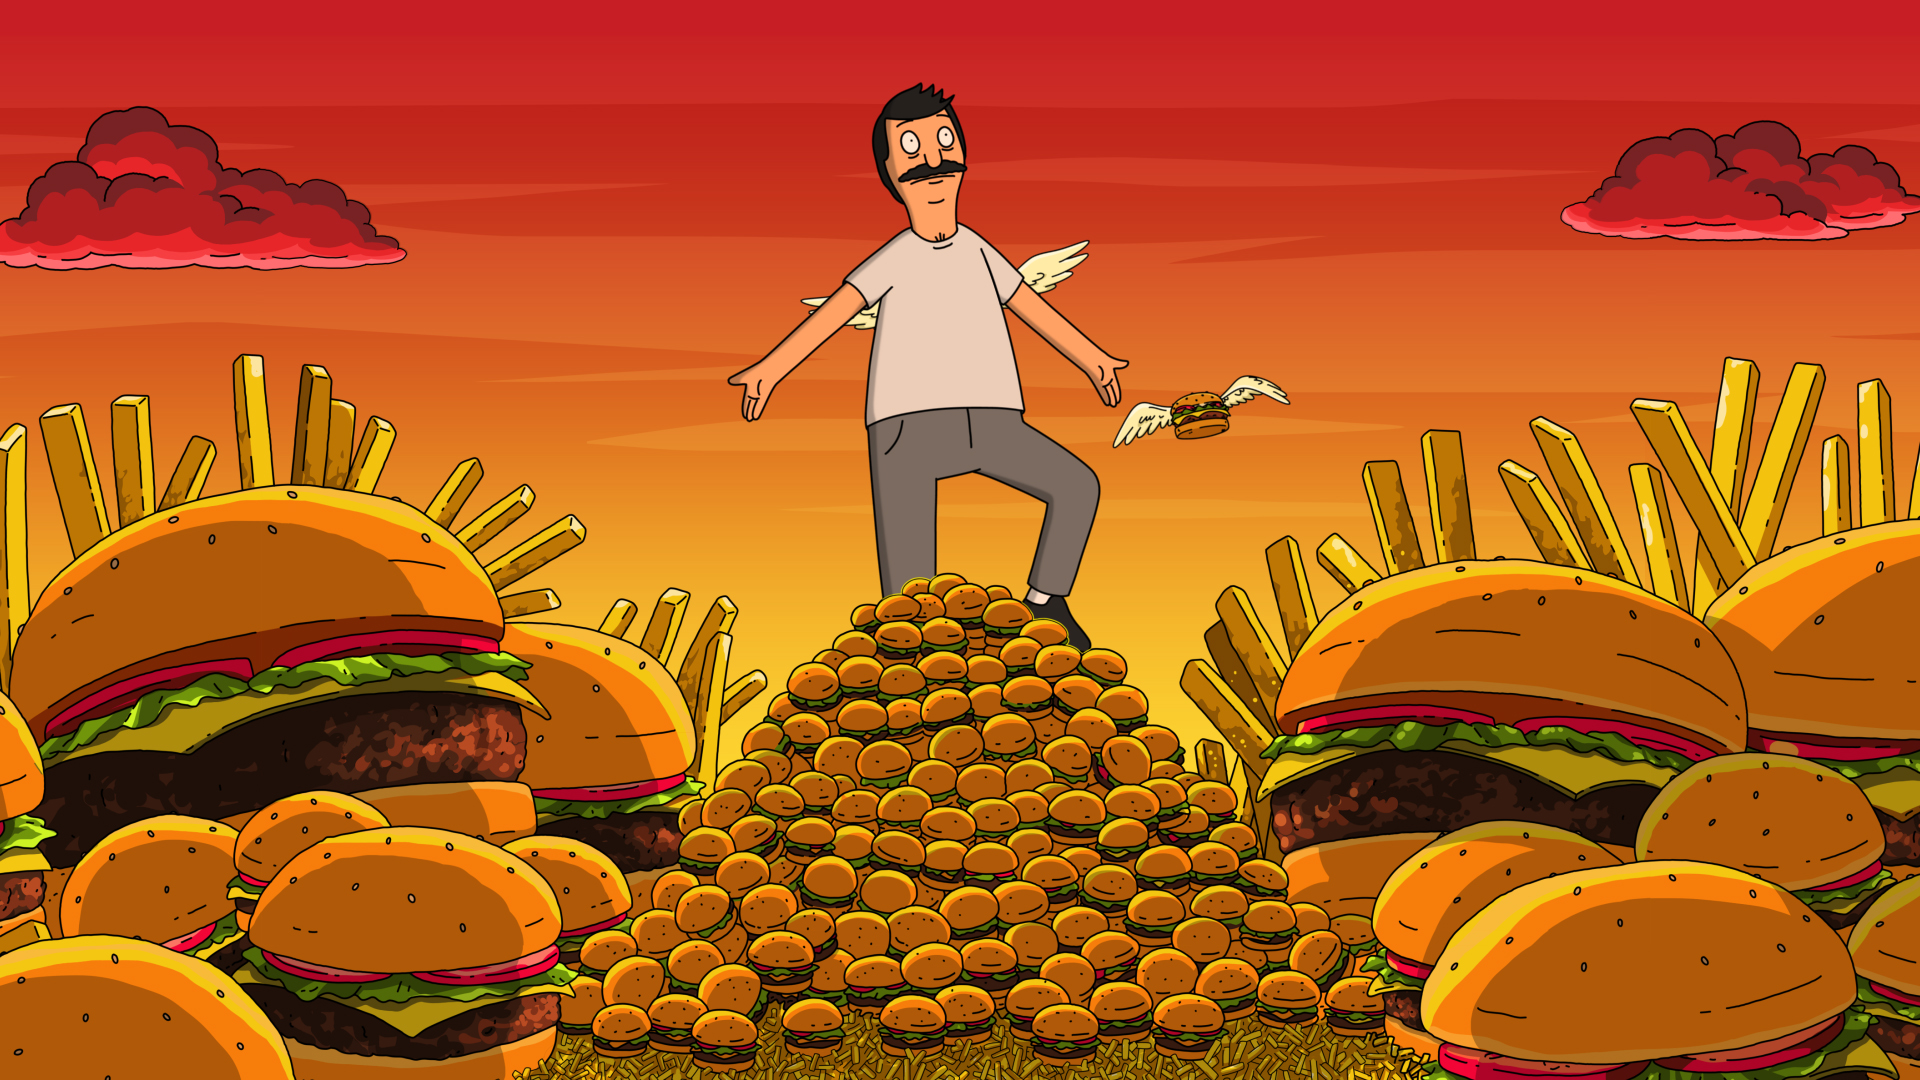 Bob standing confidently on a pile of burgers surrounded by fries in a daydream.